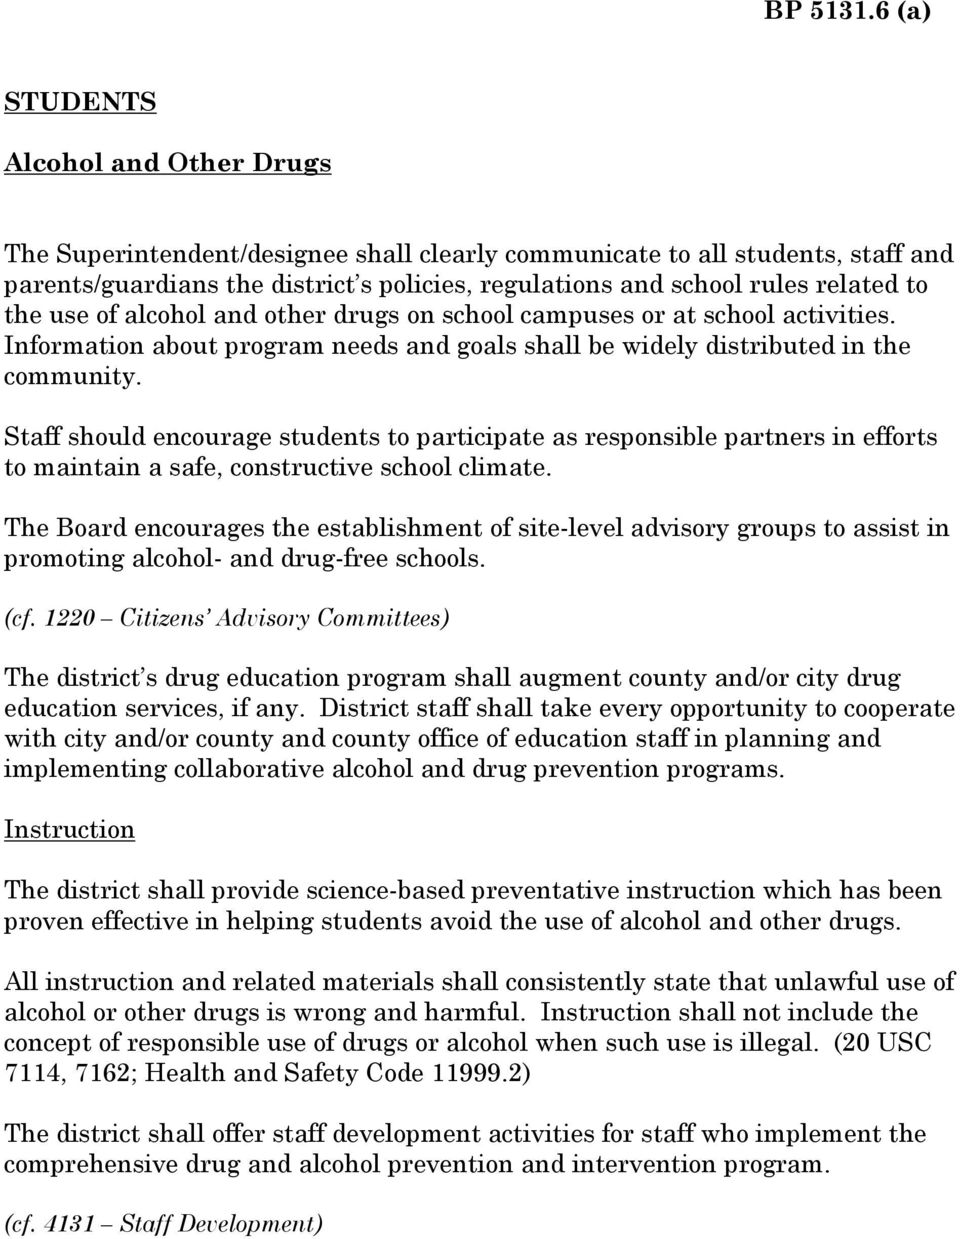 drugs on school campuses or at school activities. Information about program needs and goals shall be widely distributed in the community.